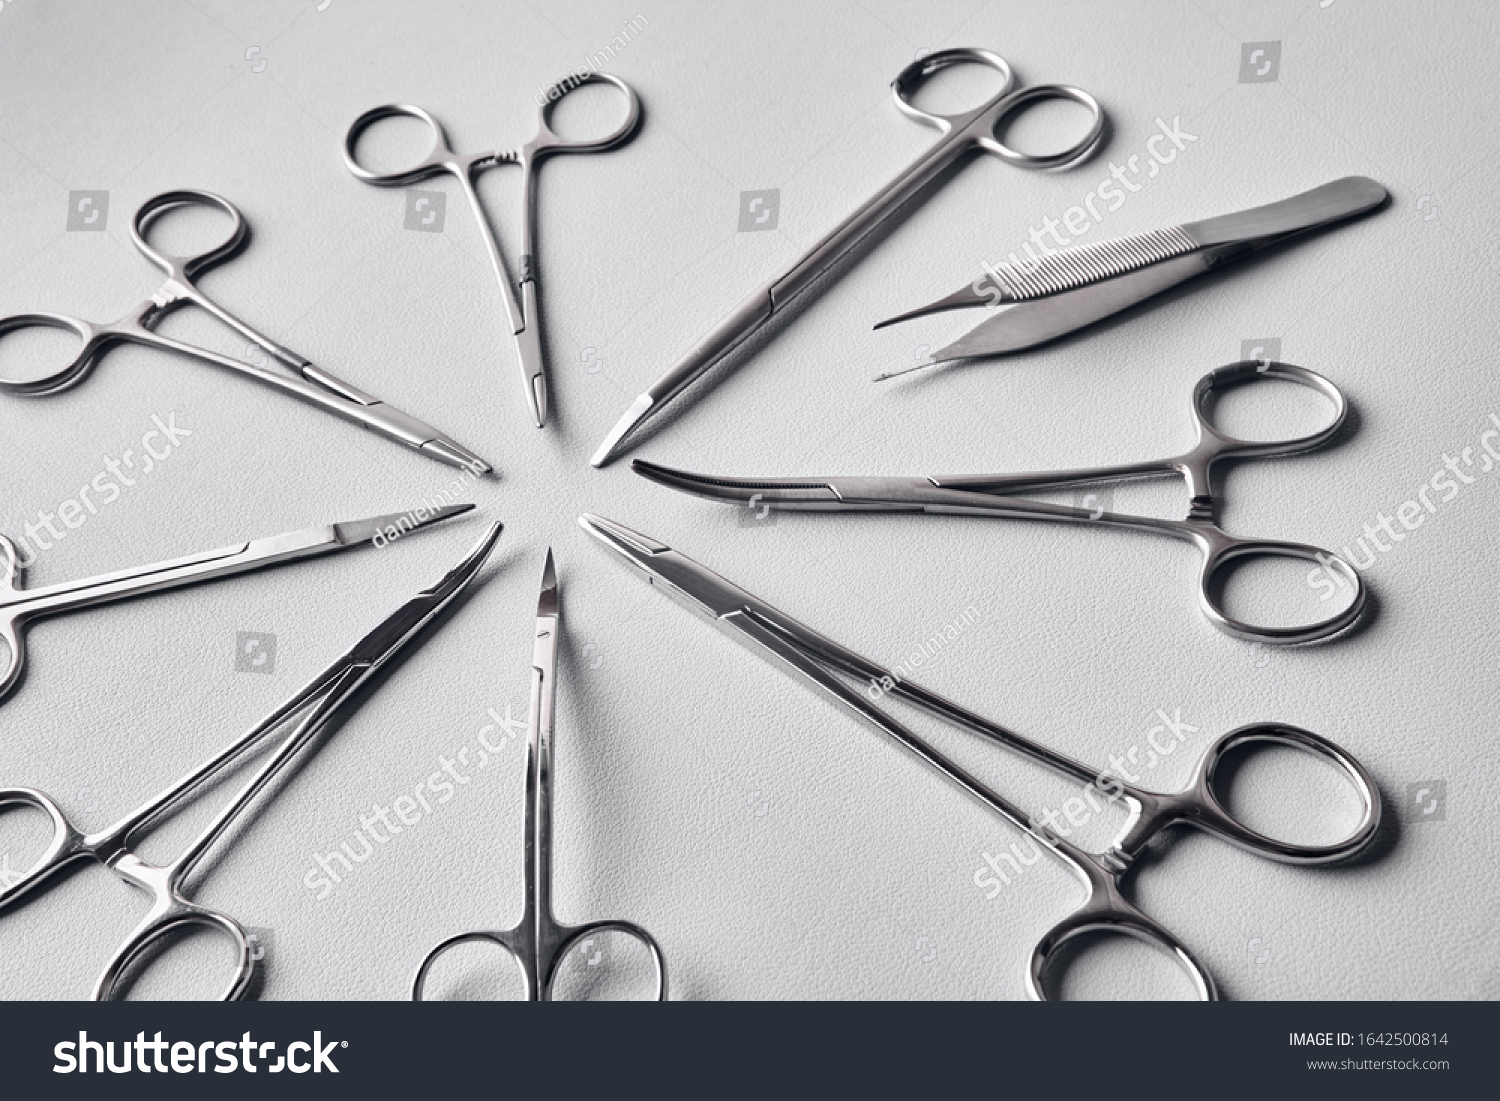 Diverse Medical Surgery Instruments Isolated Top Stock Photo 1642500814 ...